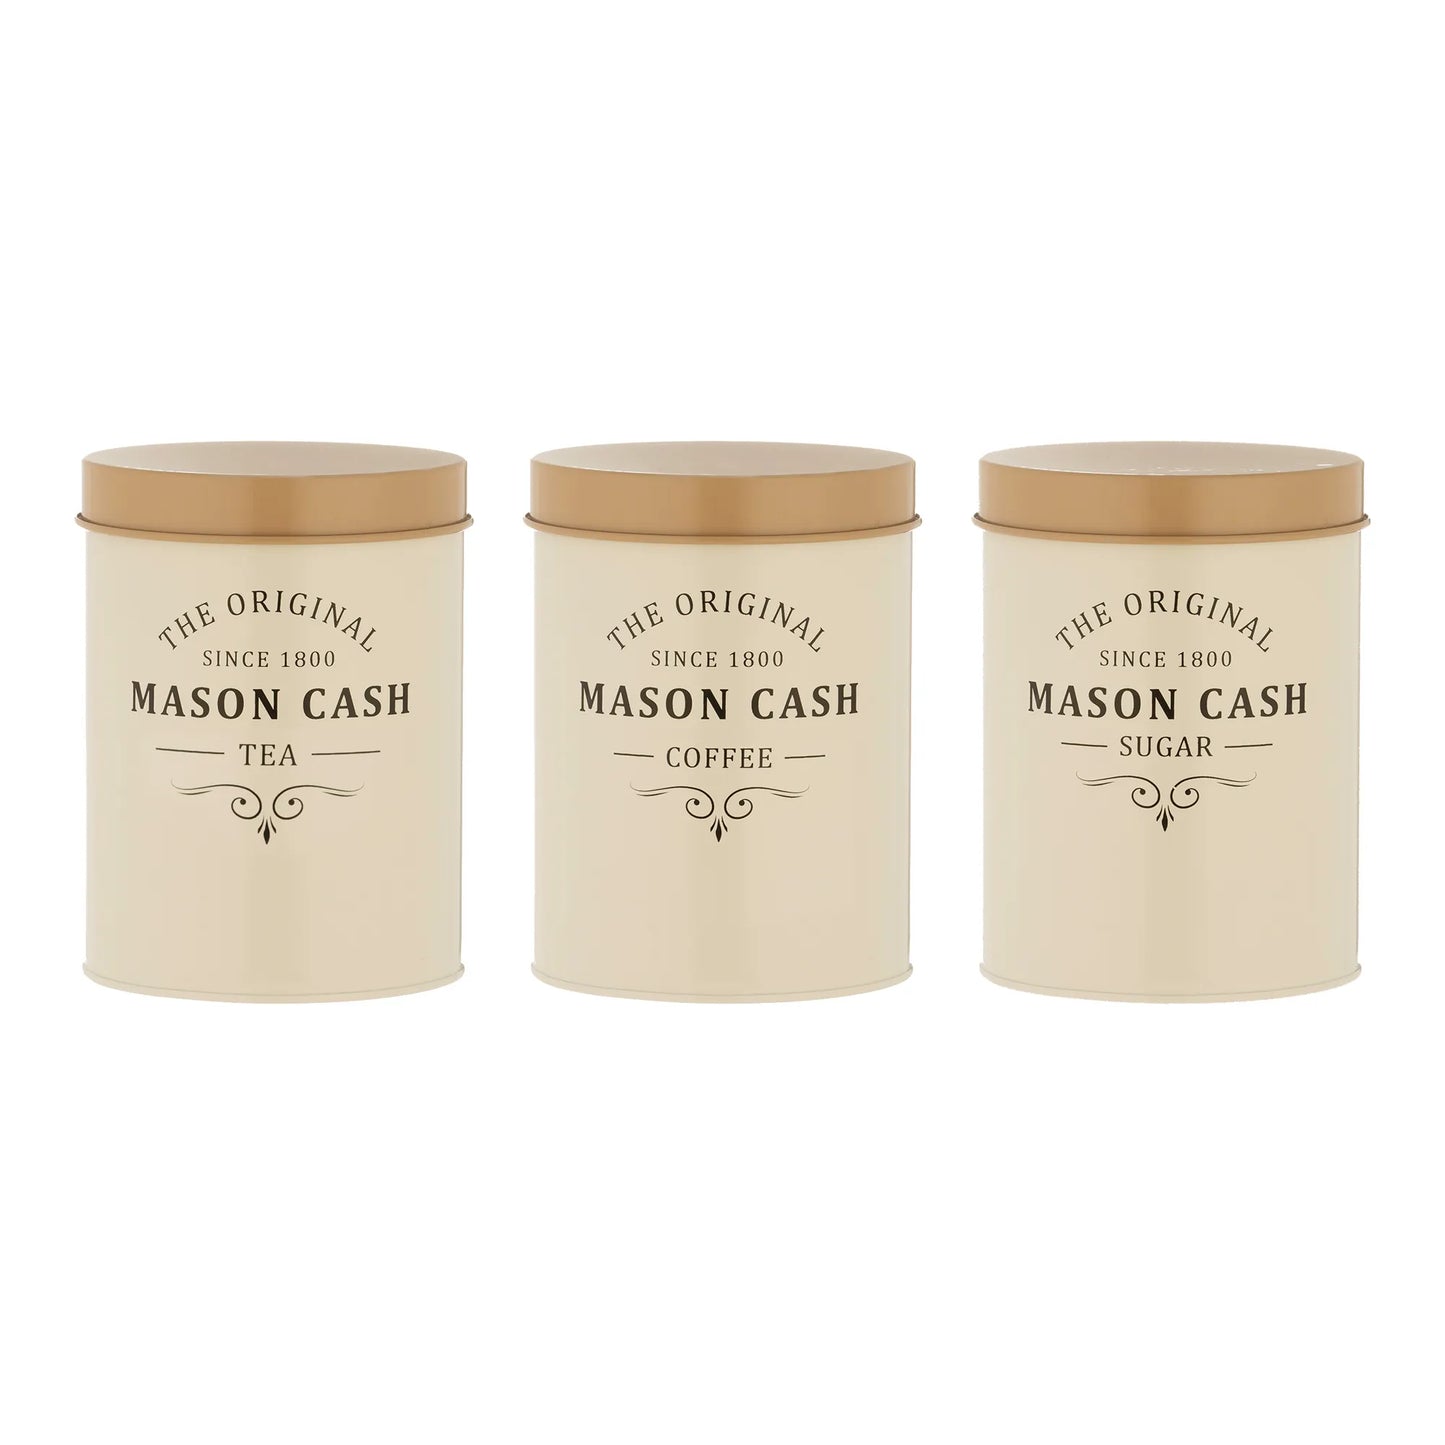 Mason Cash Coffee Canister 1.3L